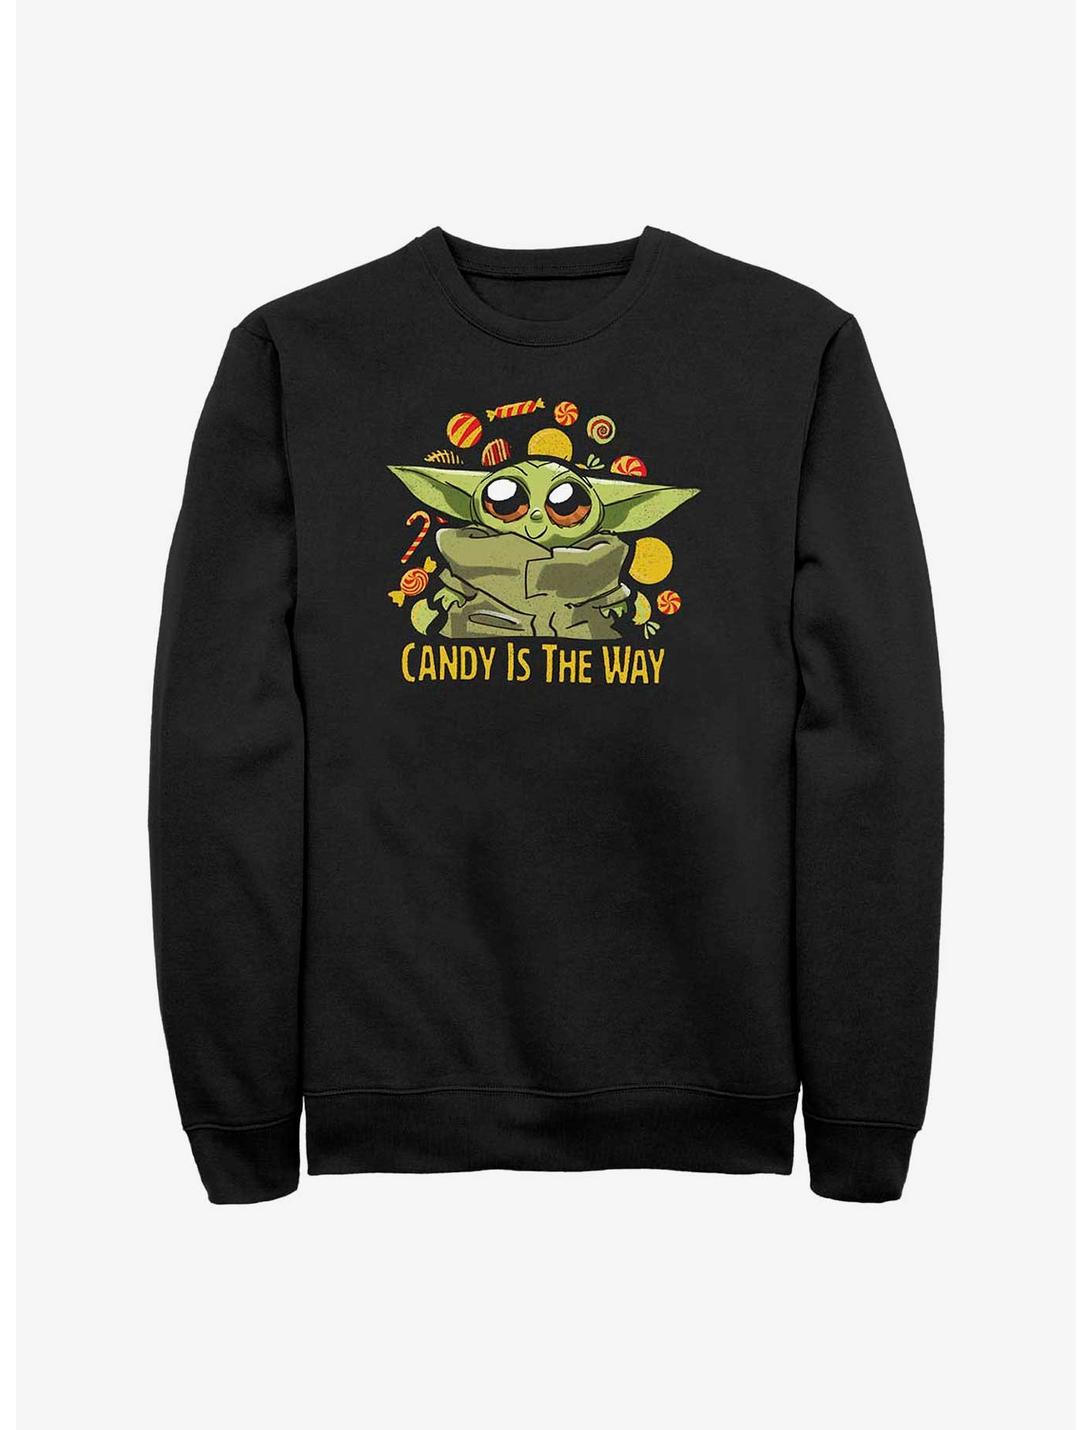 Star Wars The Mandalorian The Child Candy Is The Way Sweatshirt, BLACK, hi-res